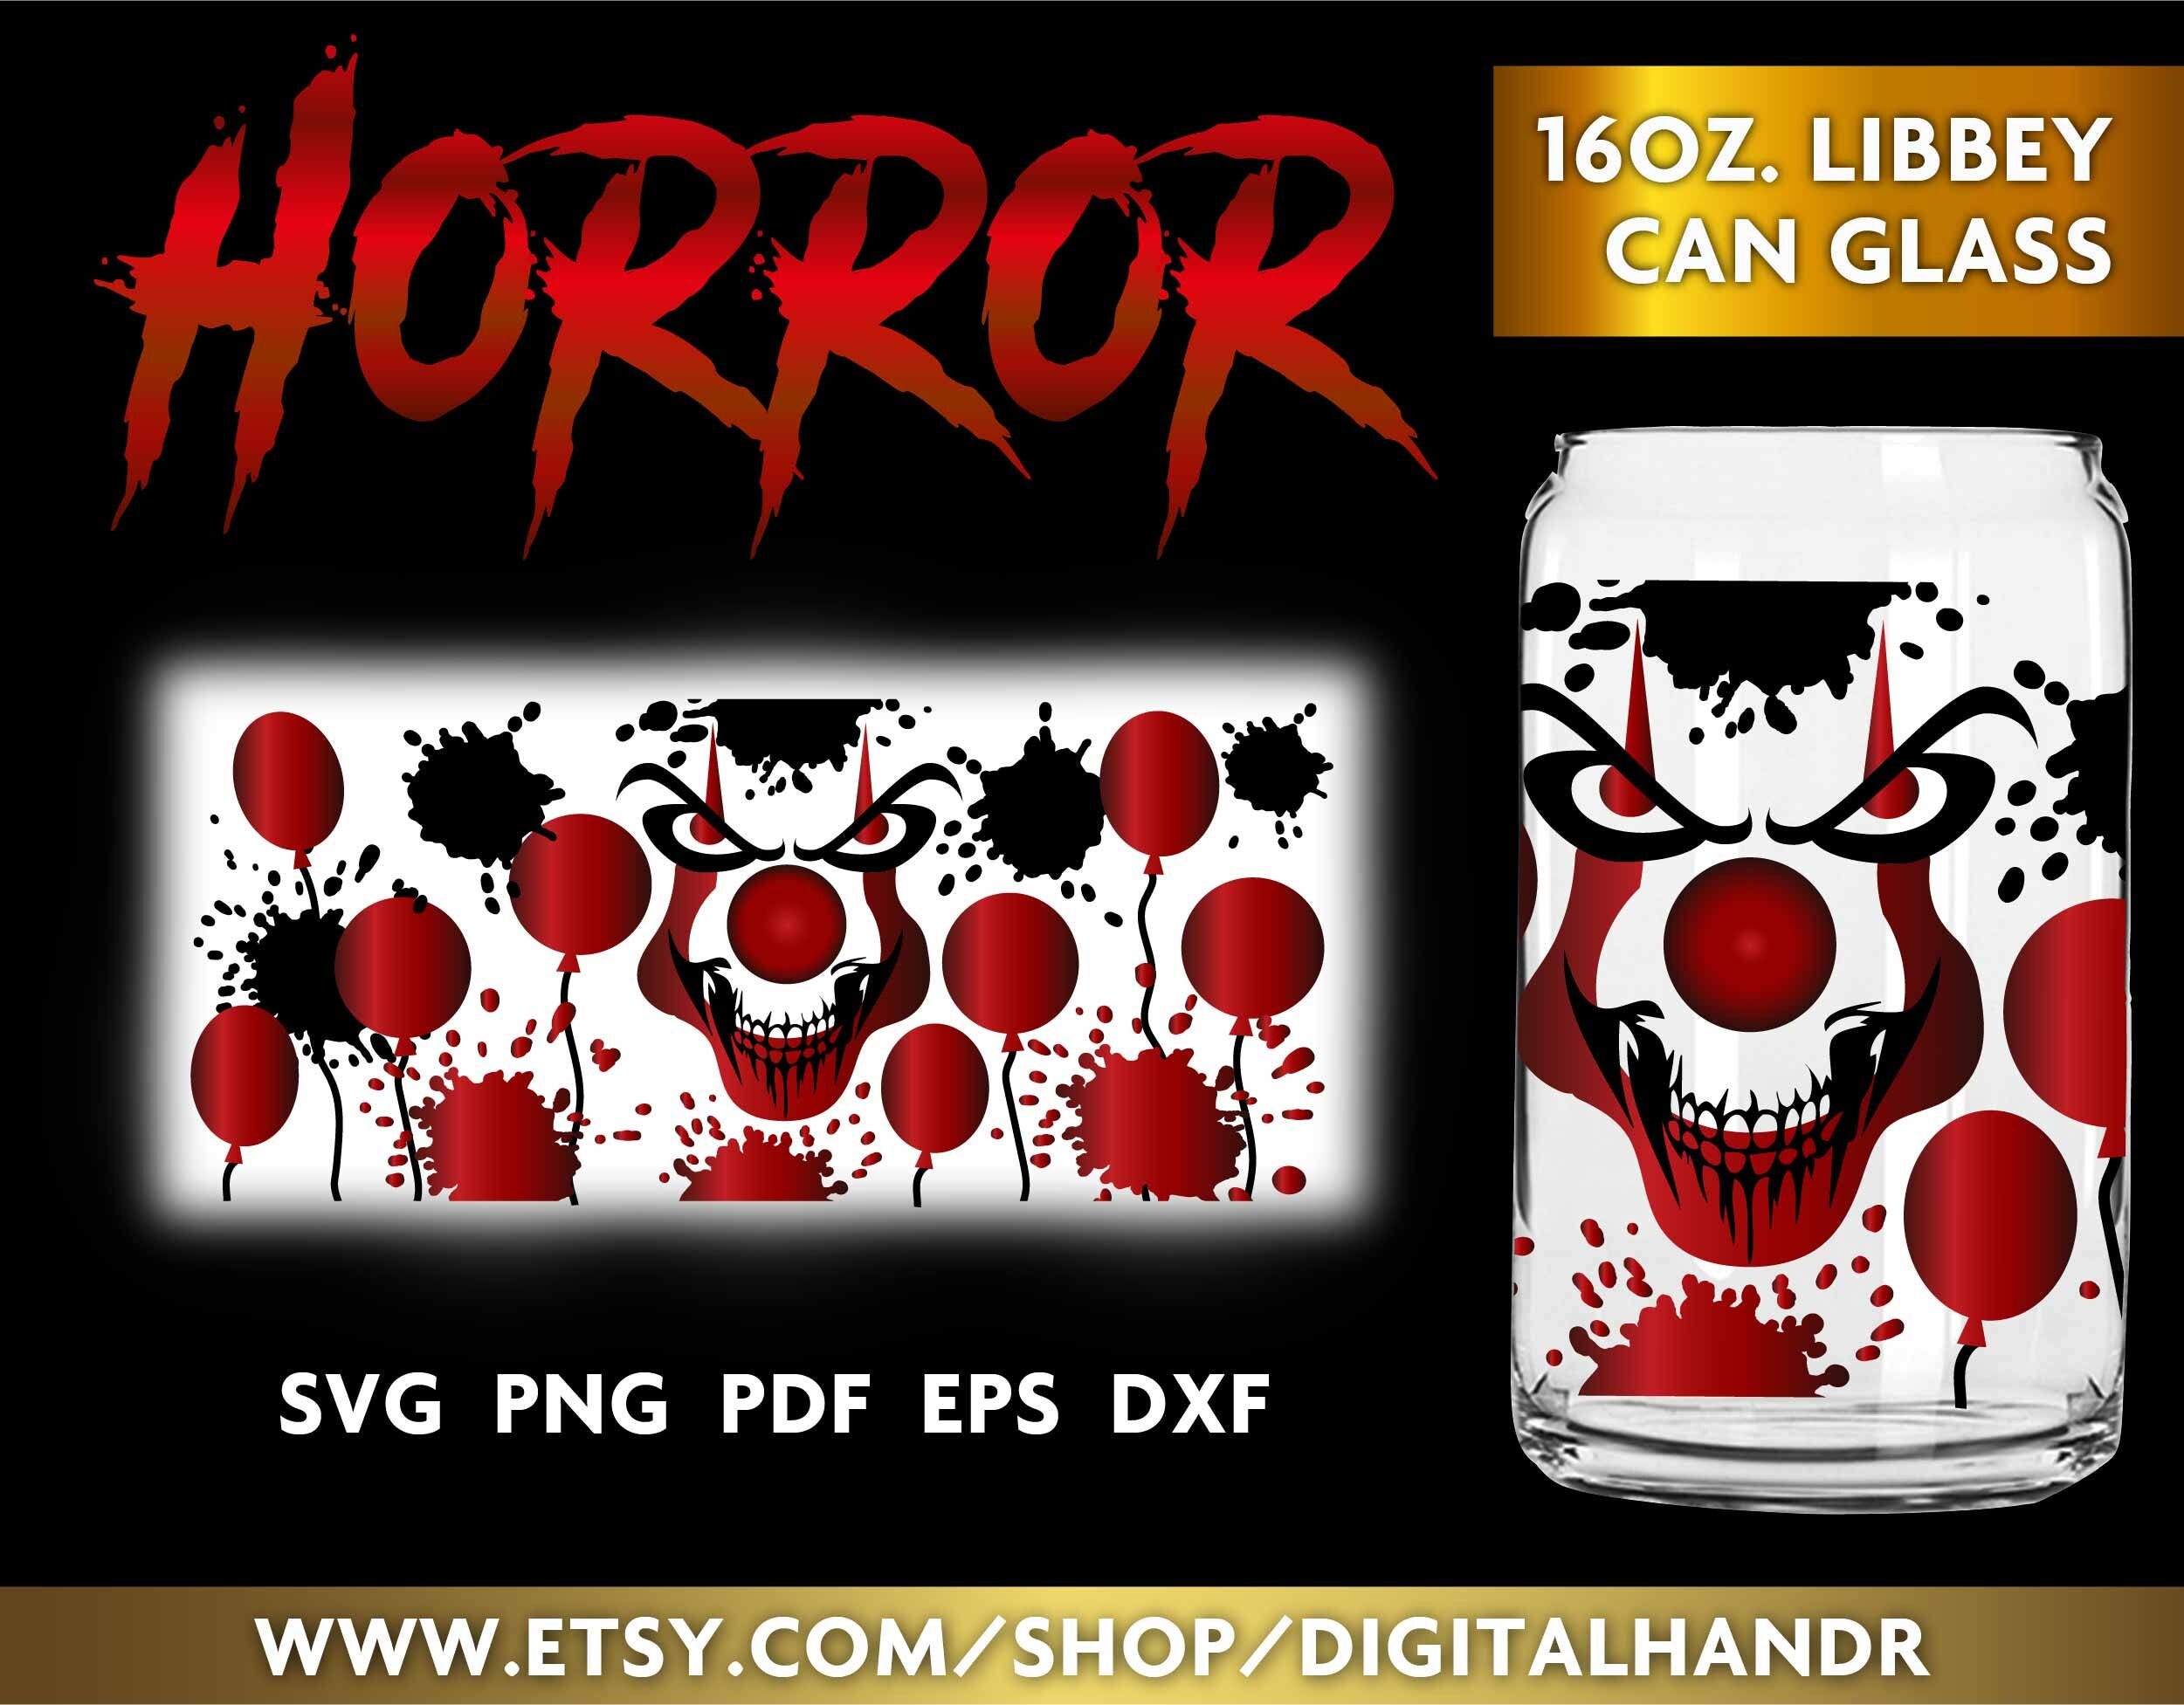 Scary Clown can glass svg libbey, IT SVG, Clown Svg, Halloween Svg, Cricut file, Silhouette File, Horror Svg, Horror Movie Svg (